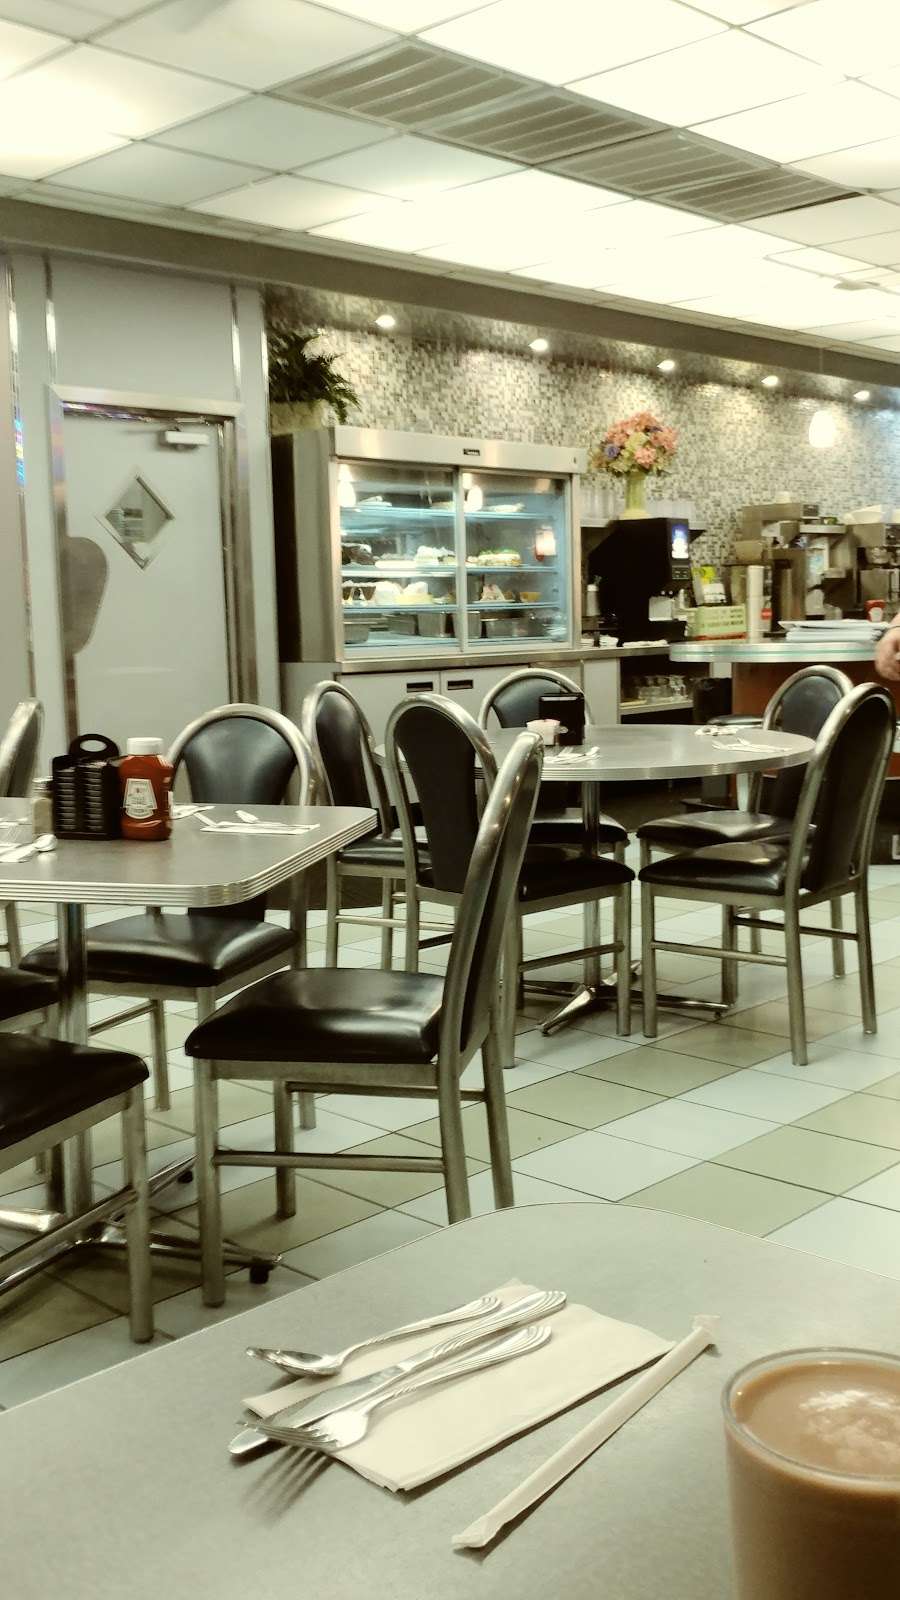 Star Diner & Cafe | 325 W Spruce Ave, North Wildwood, NJ 08260 | Phone: (609) 729-4900